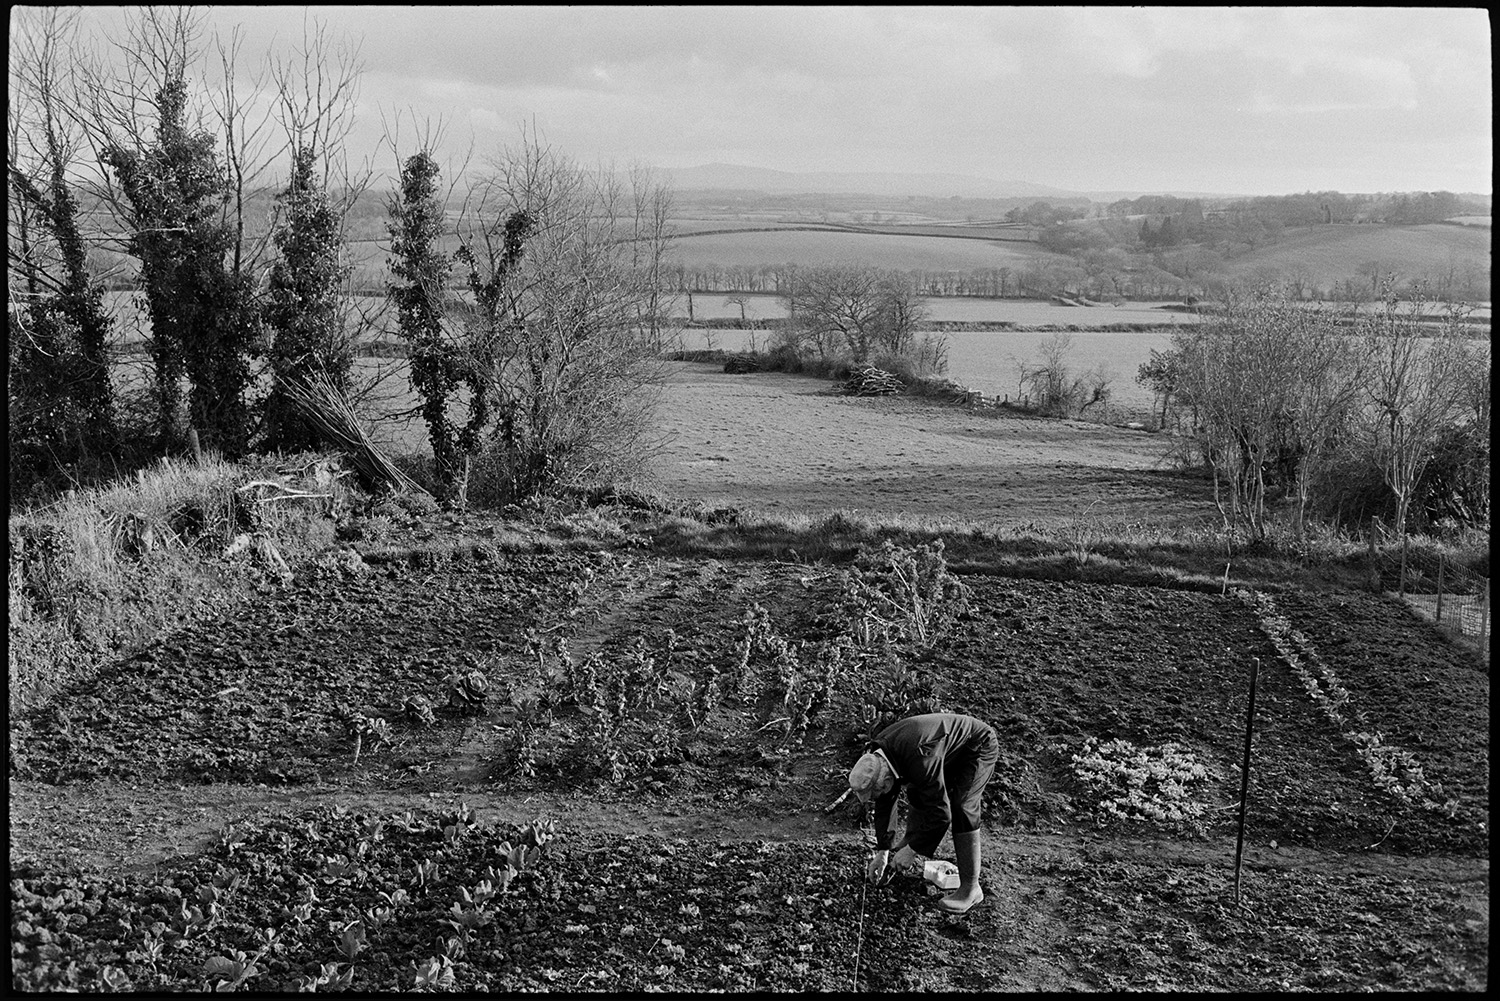 Man planting out vegetable garden. 
[A man planting out a row of seedlings in his vegetable garden at Iddesleigh. Other rows of vegetables can be seen and a landscape of trees and fields is visible in the background.]